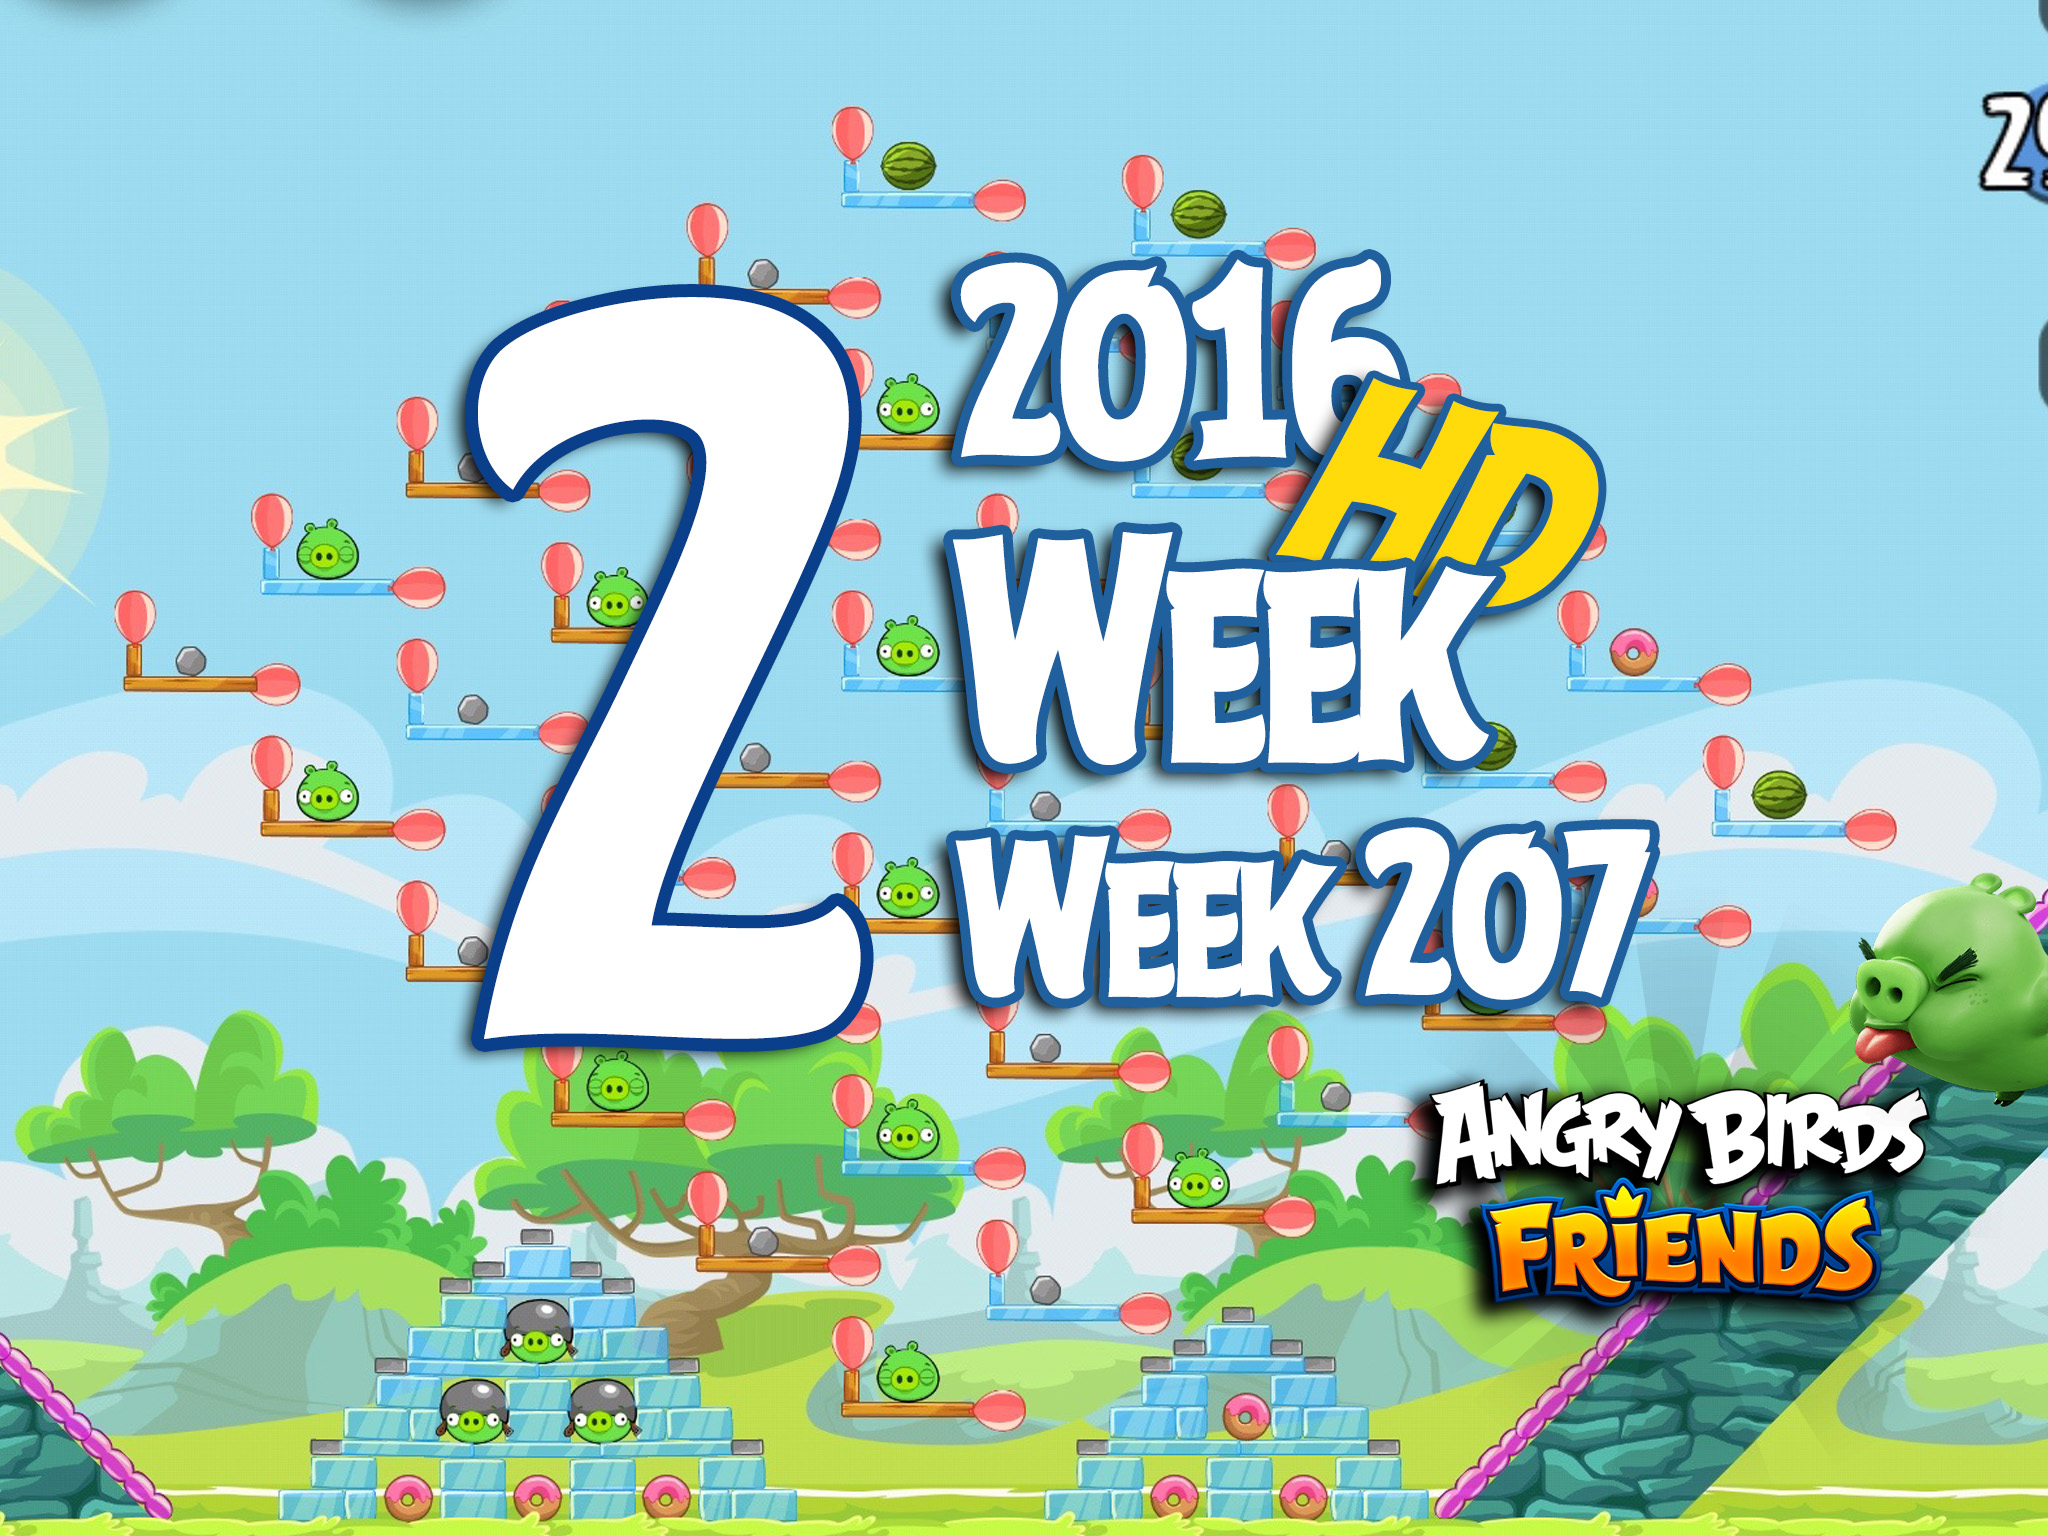 Angry Birds Friends Tournament Level 2 Week 207 Walkthrough | May 5th 2016